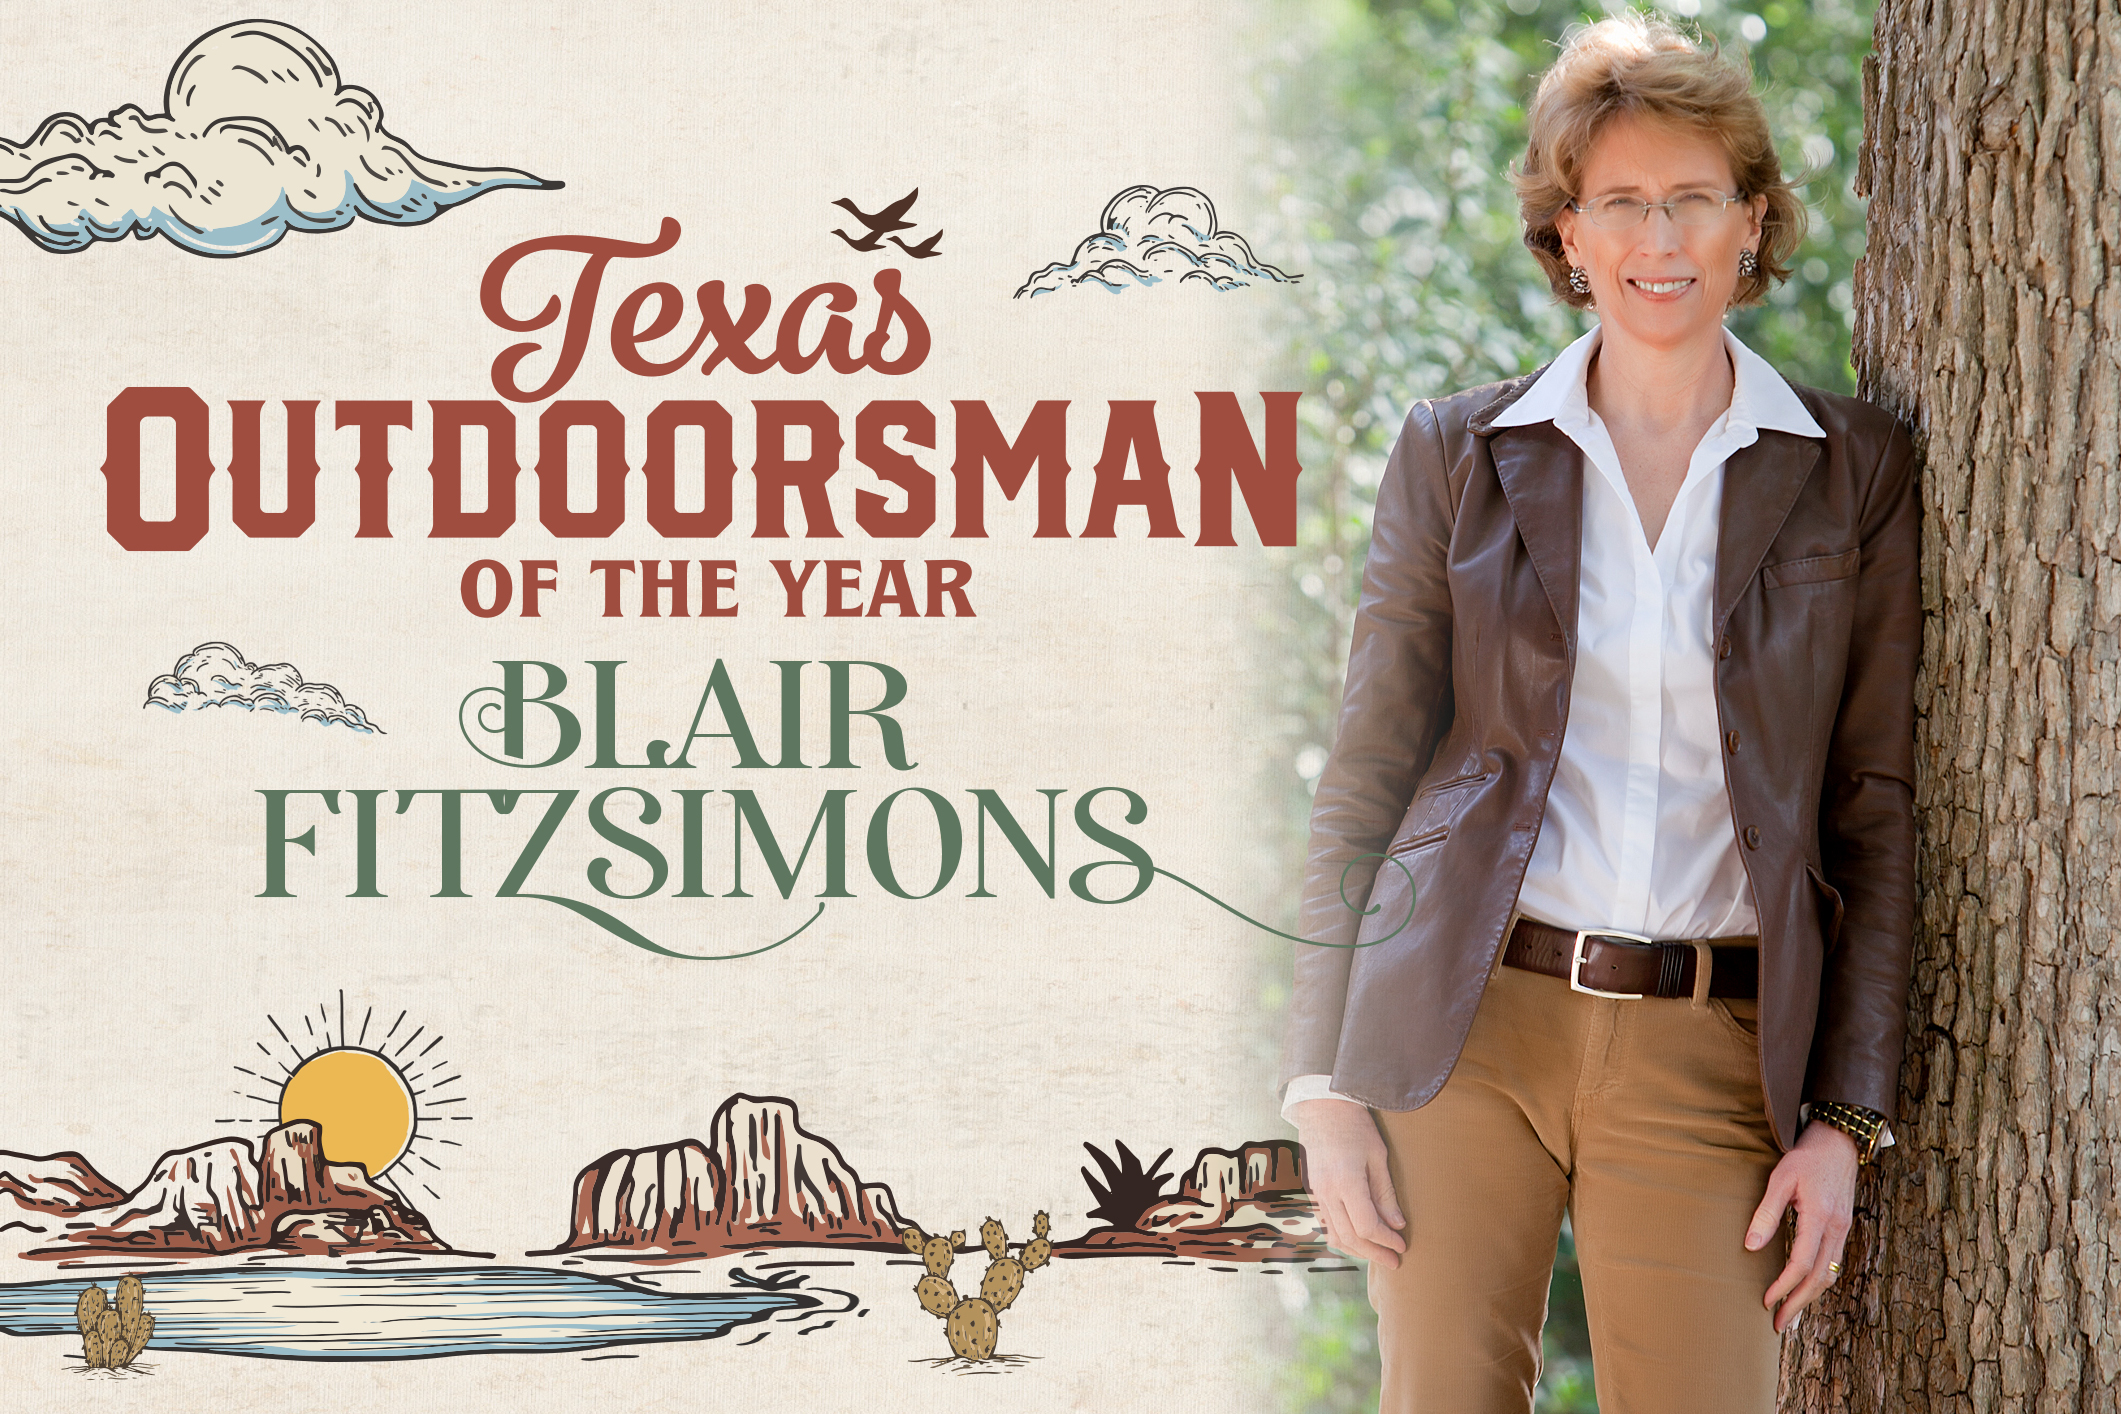 New Campaign For Texas Outdoorsman Of The Year